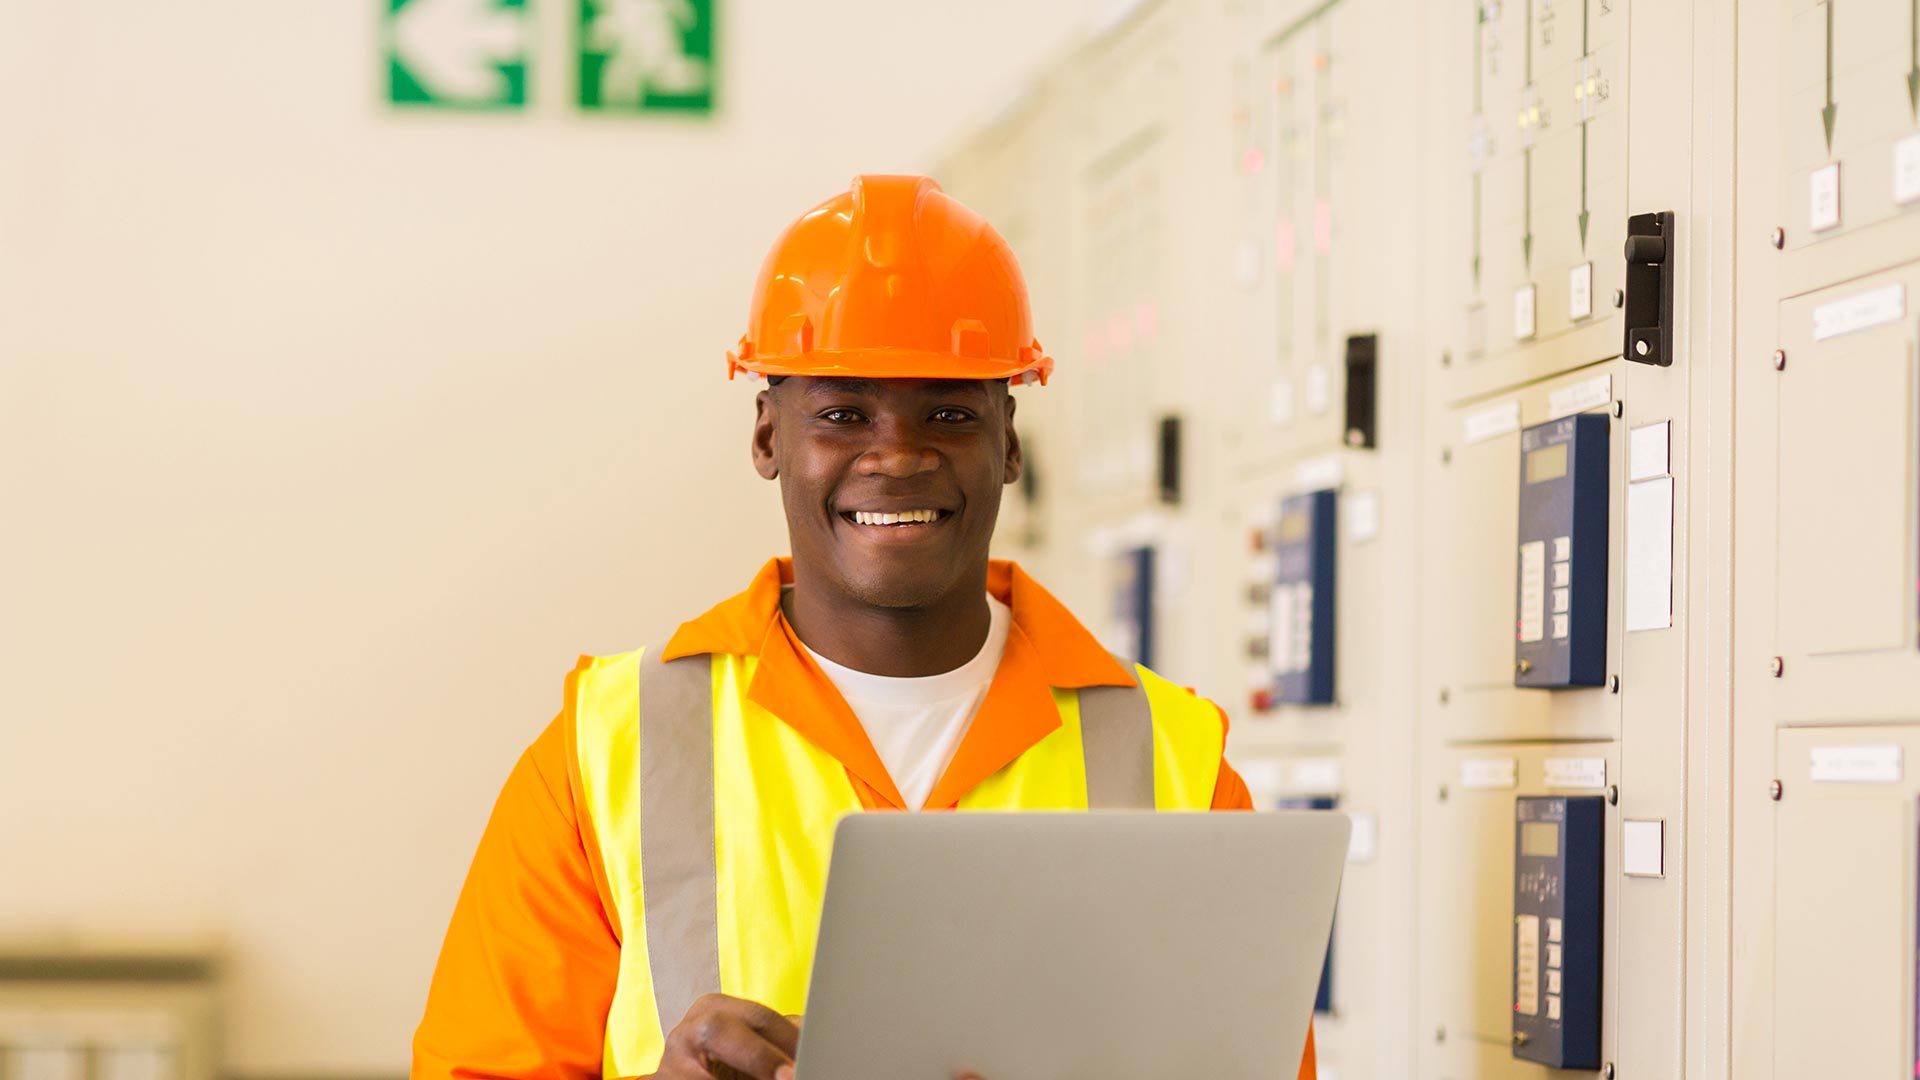 Man wearing hard hat with a laptop in hand